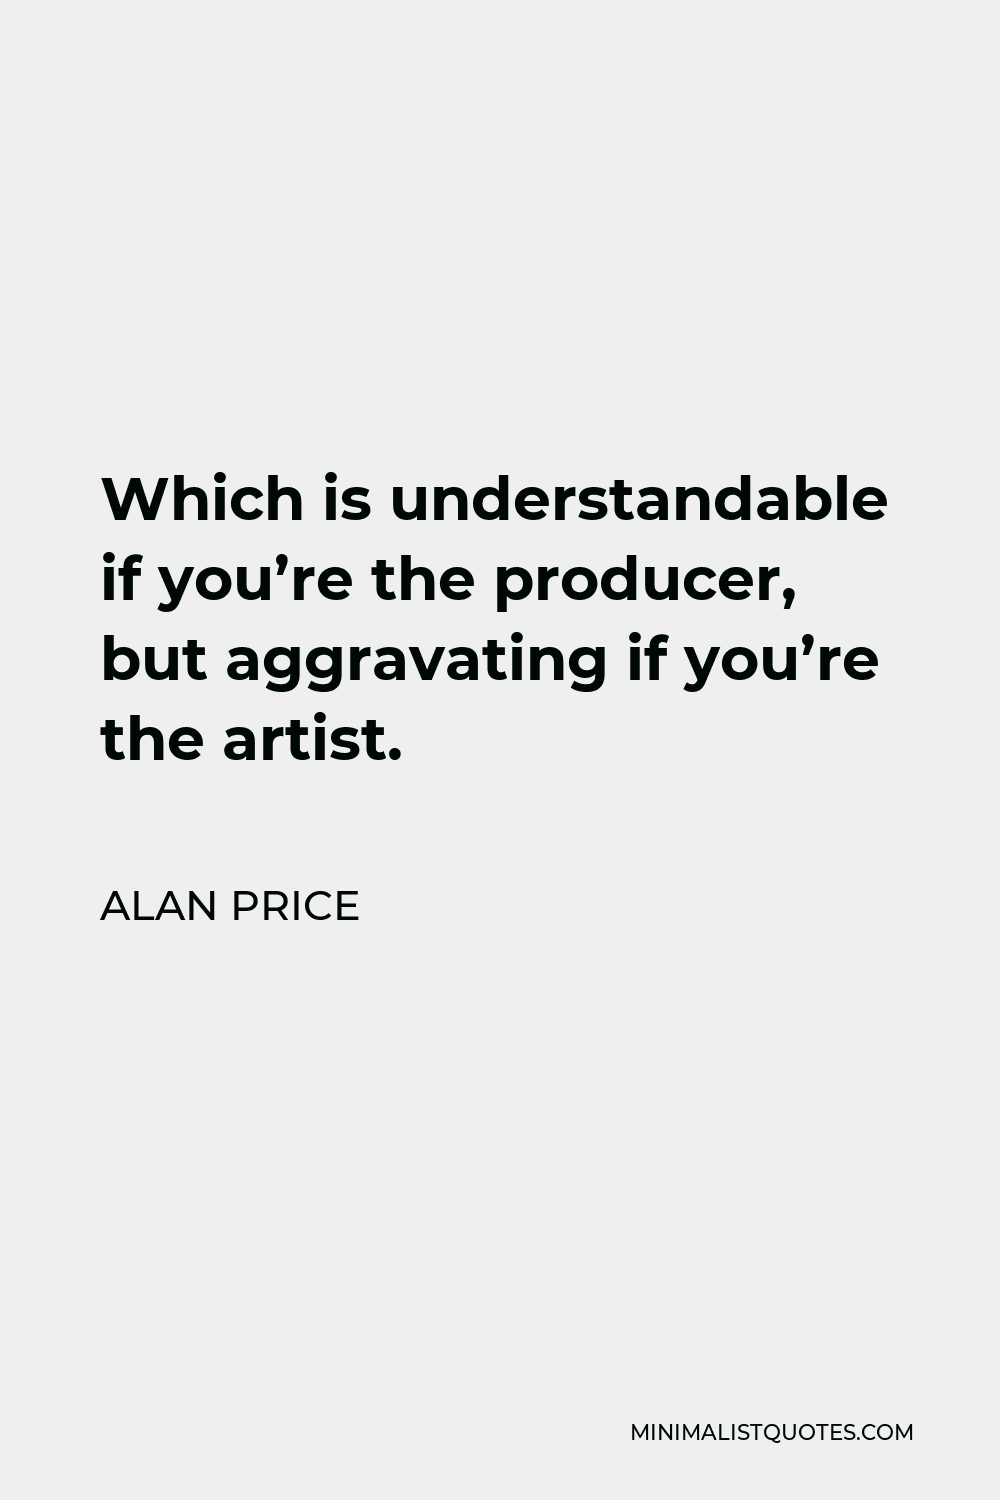 Alan Price Quote - Which is understandable if you’re the producer, but aggravating if you’re the artist.